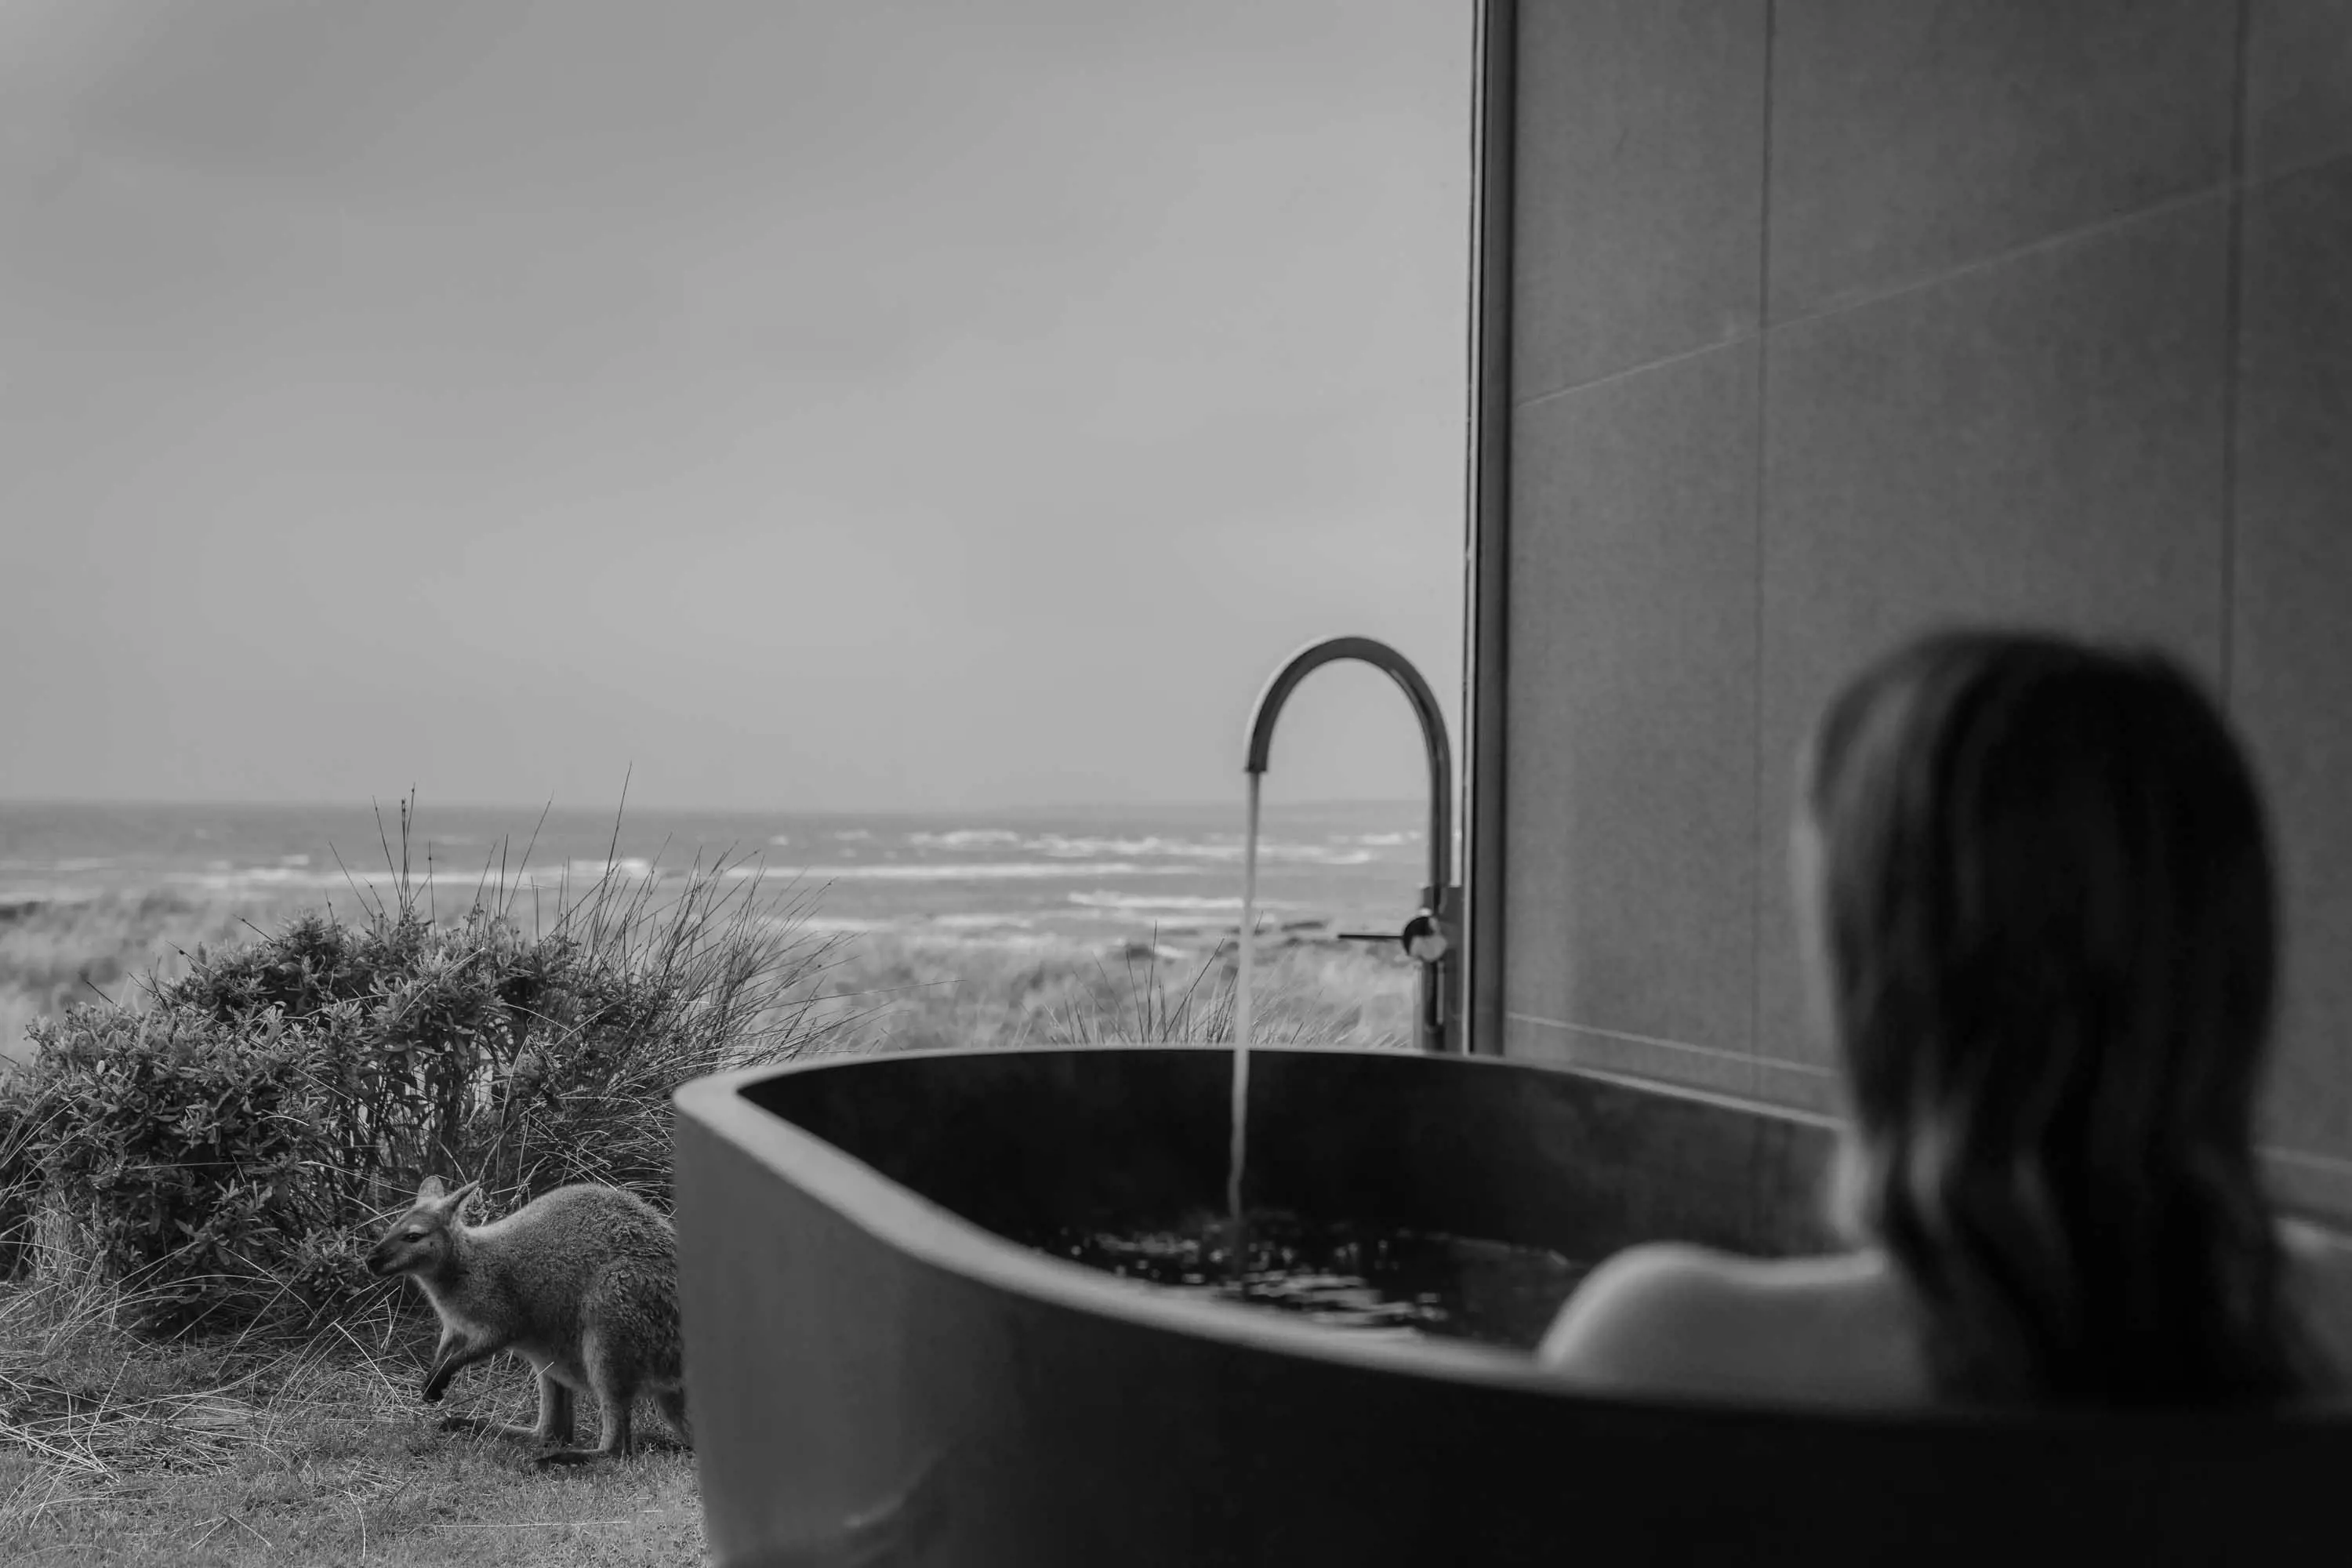 A woman reclines in a large dark stone bath with views of the coast. A small kangaroo grazes in grass nearby.